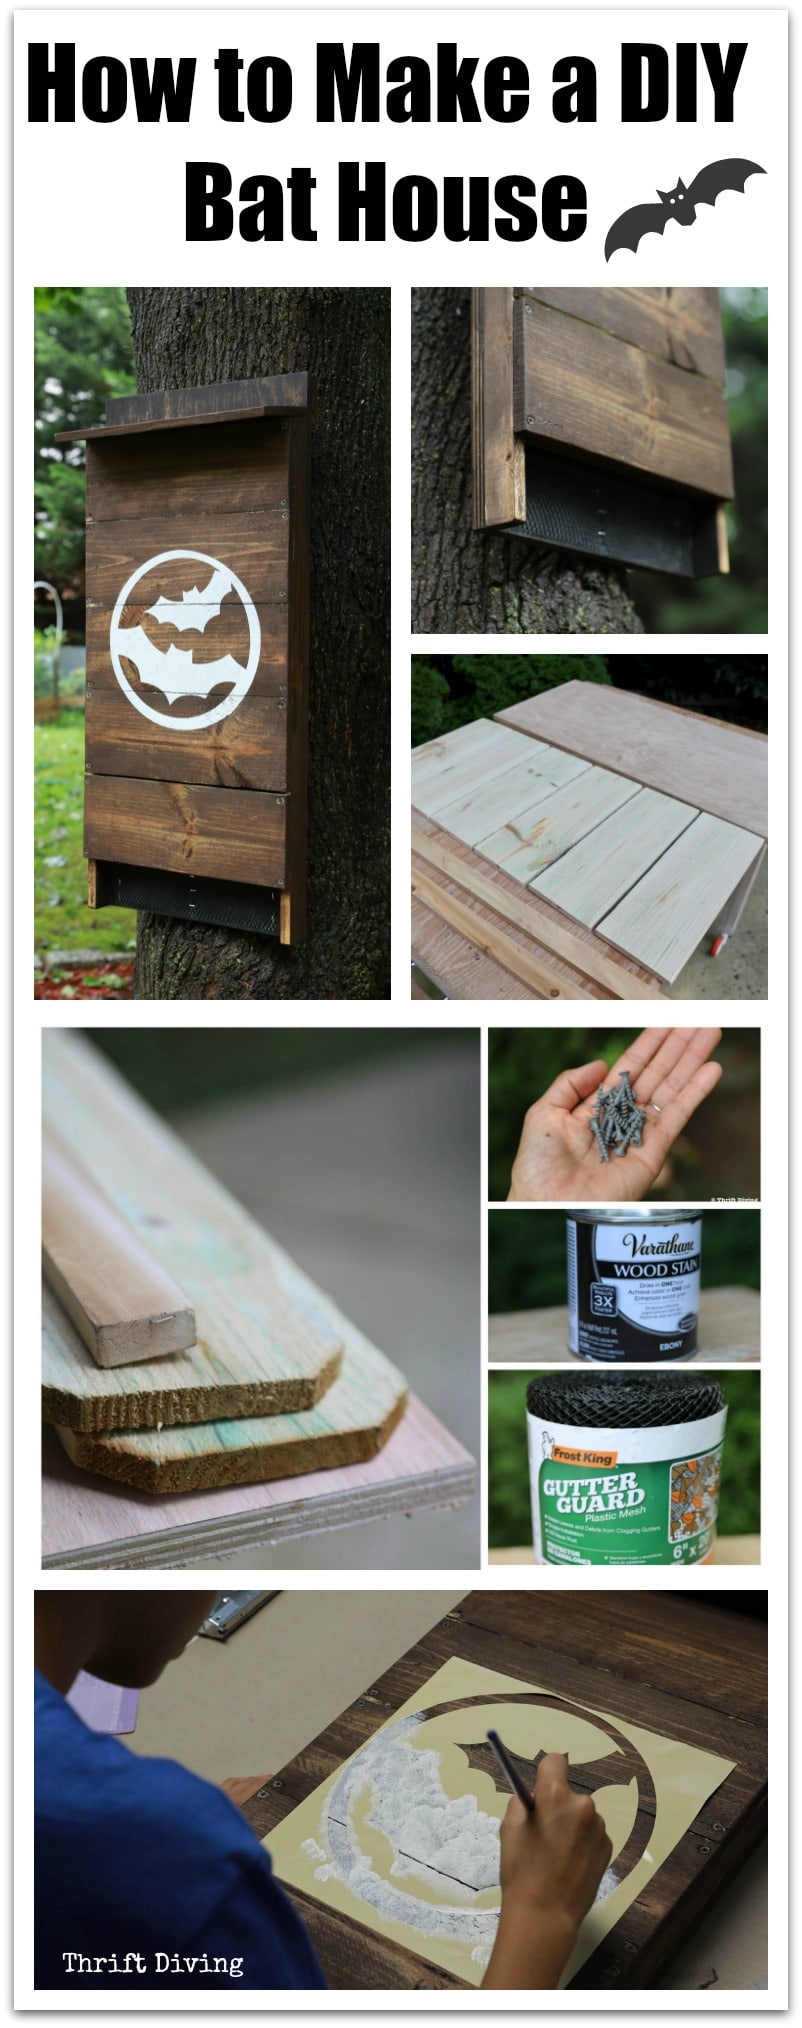 How to Build a Bat House - A single bat can eat 6000 to 8000 mosquitoes per night! Attract bats to your yard by installing a bat house on the side of your house or on a pole. - Thrift Diving